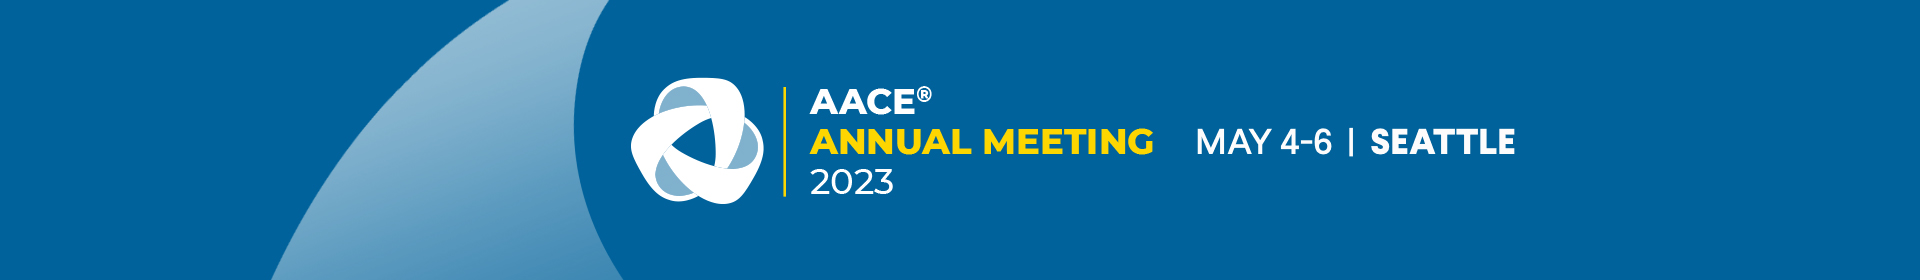 AACE 2023 Annual Conference Event Banner